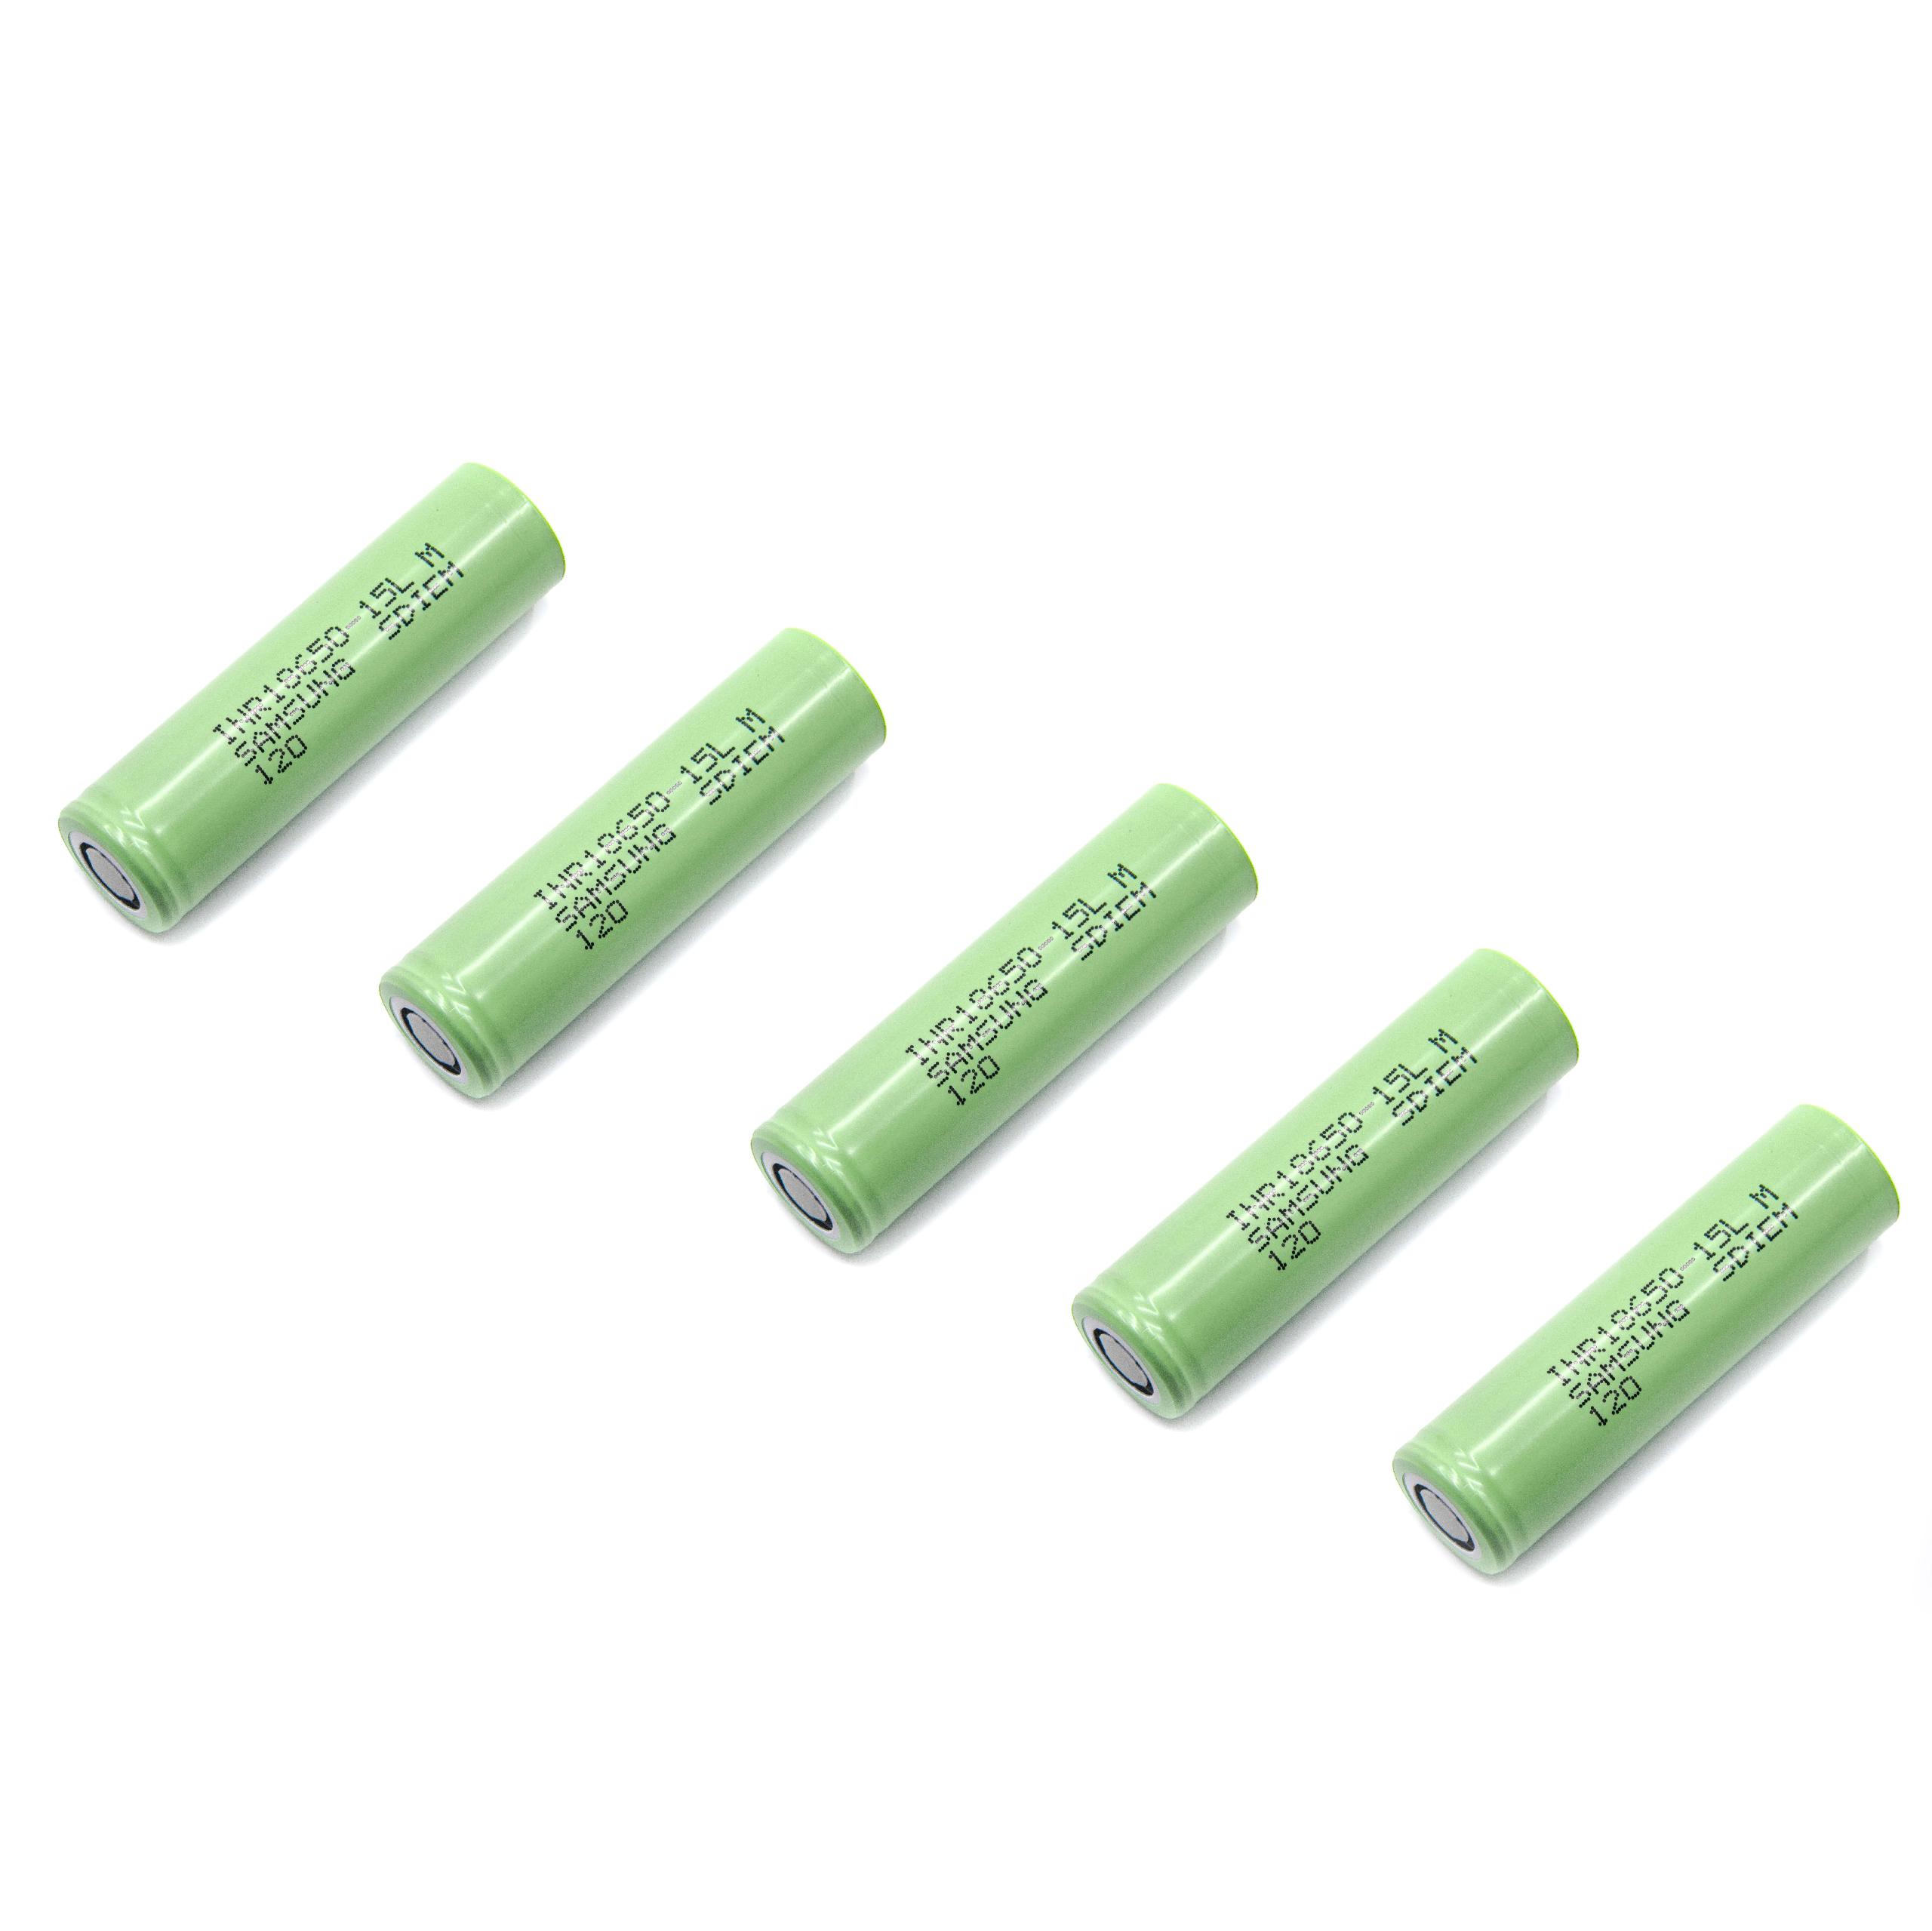 Raw Battery Cells (5 Piece) for Rechargeable Batteries - 1500mAh 3.6V LiNiMnCoO2